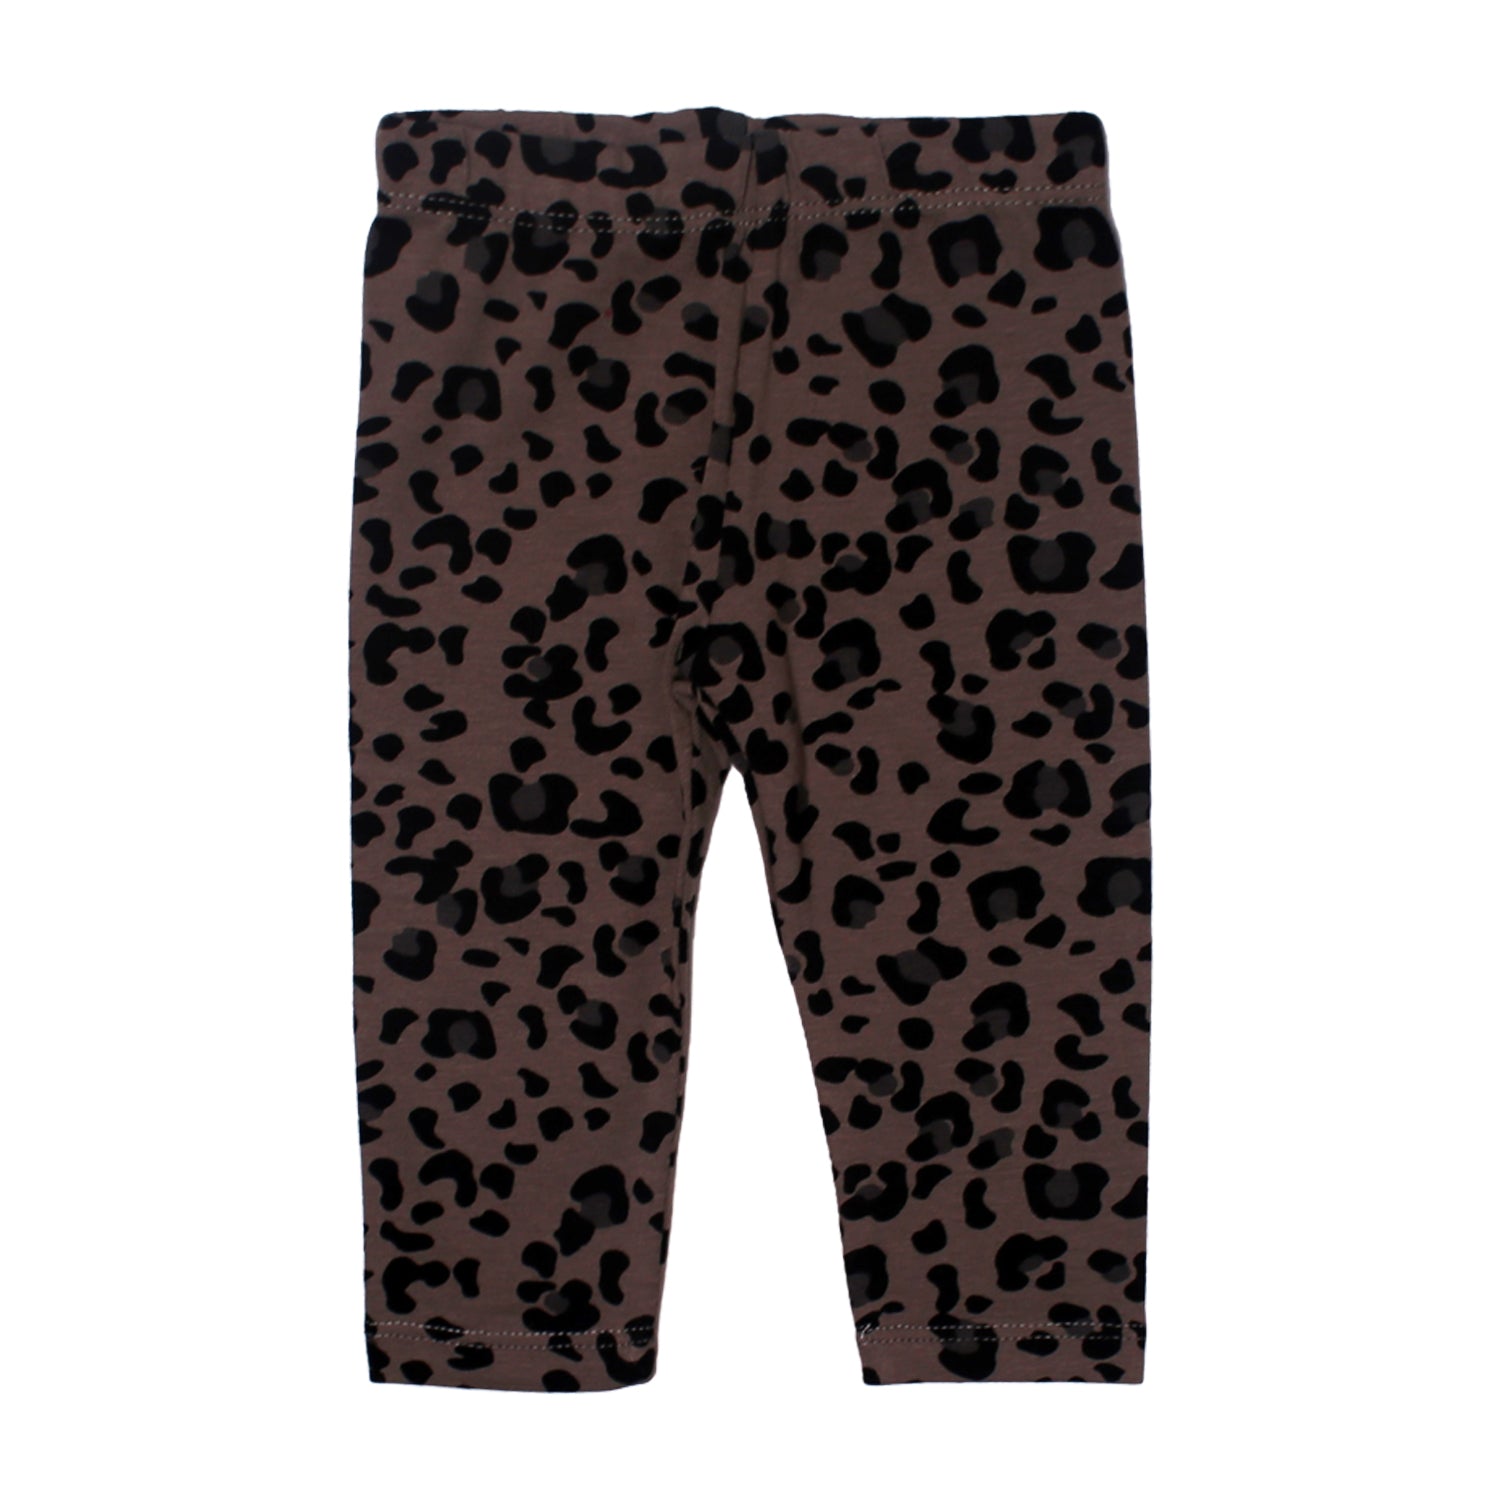 GREY LEOPARDS PRINTED TIGHTS FOR GIRLS